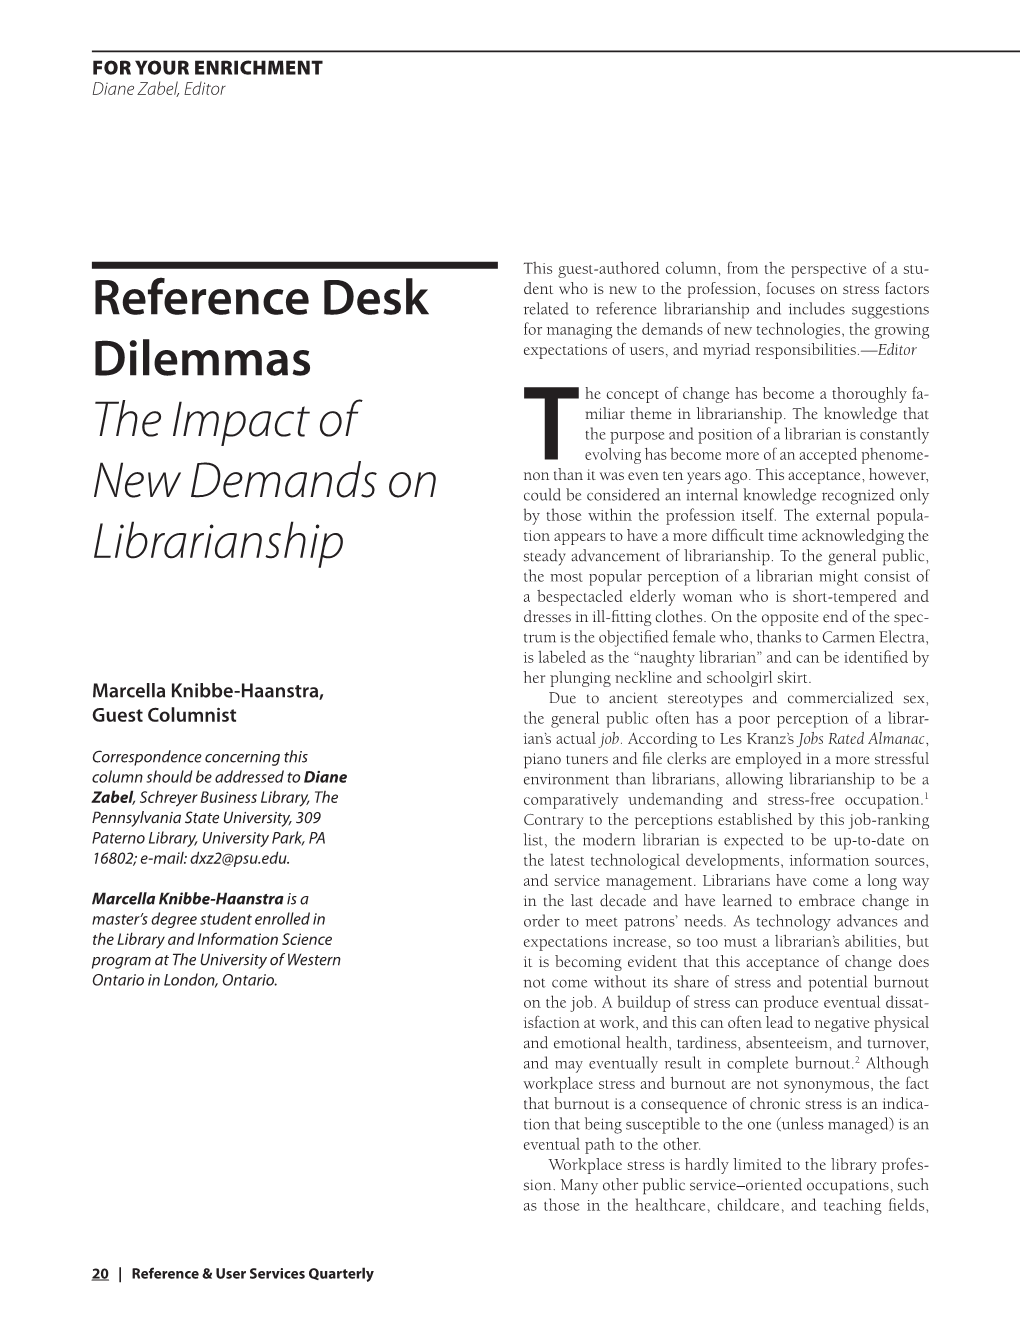 Reference Desk Dilemmas the Impact of New Demands on Librarianship